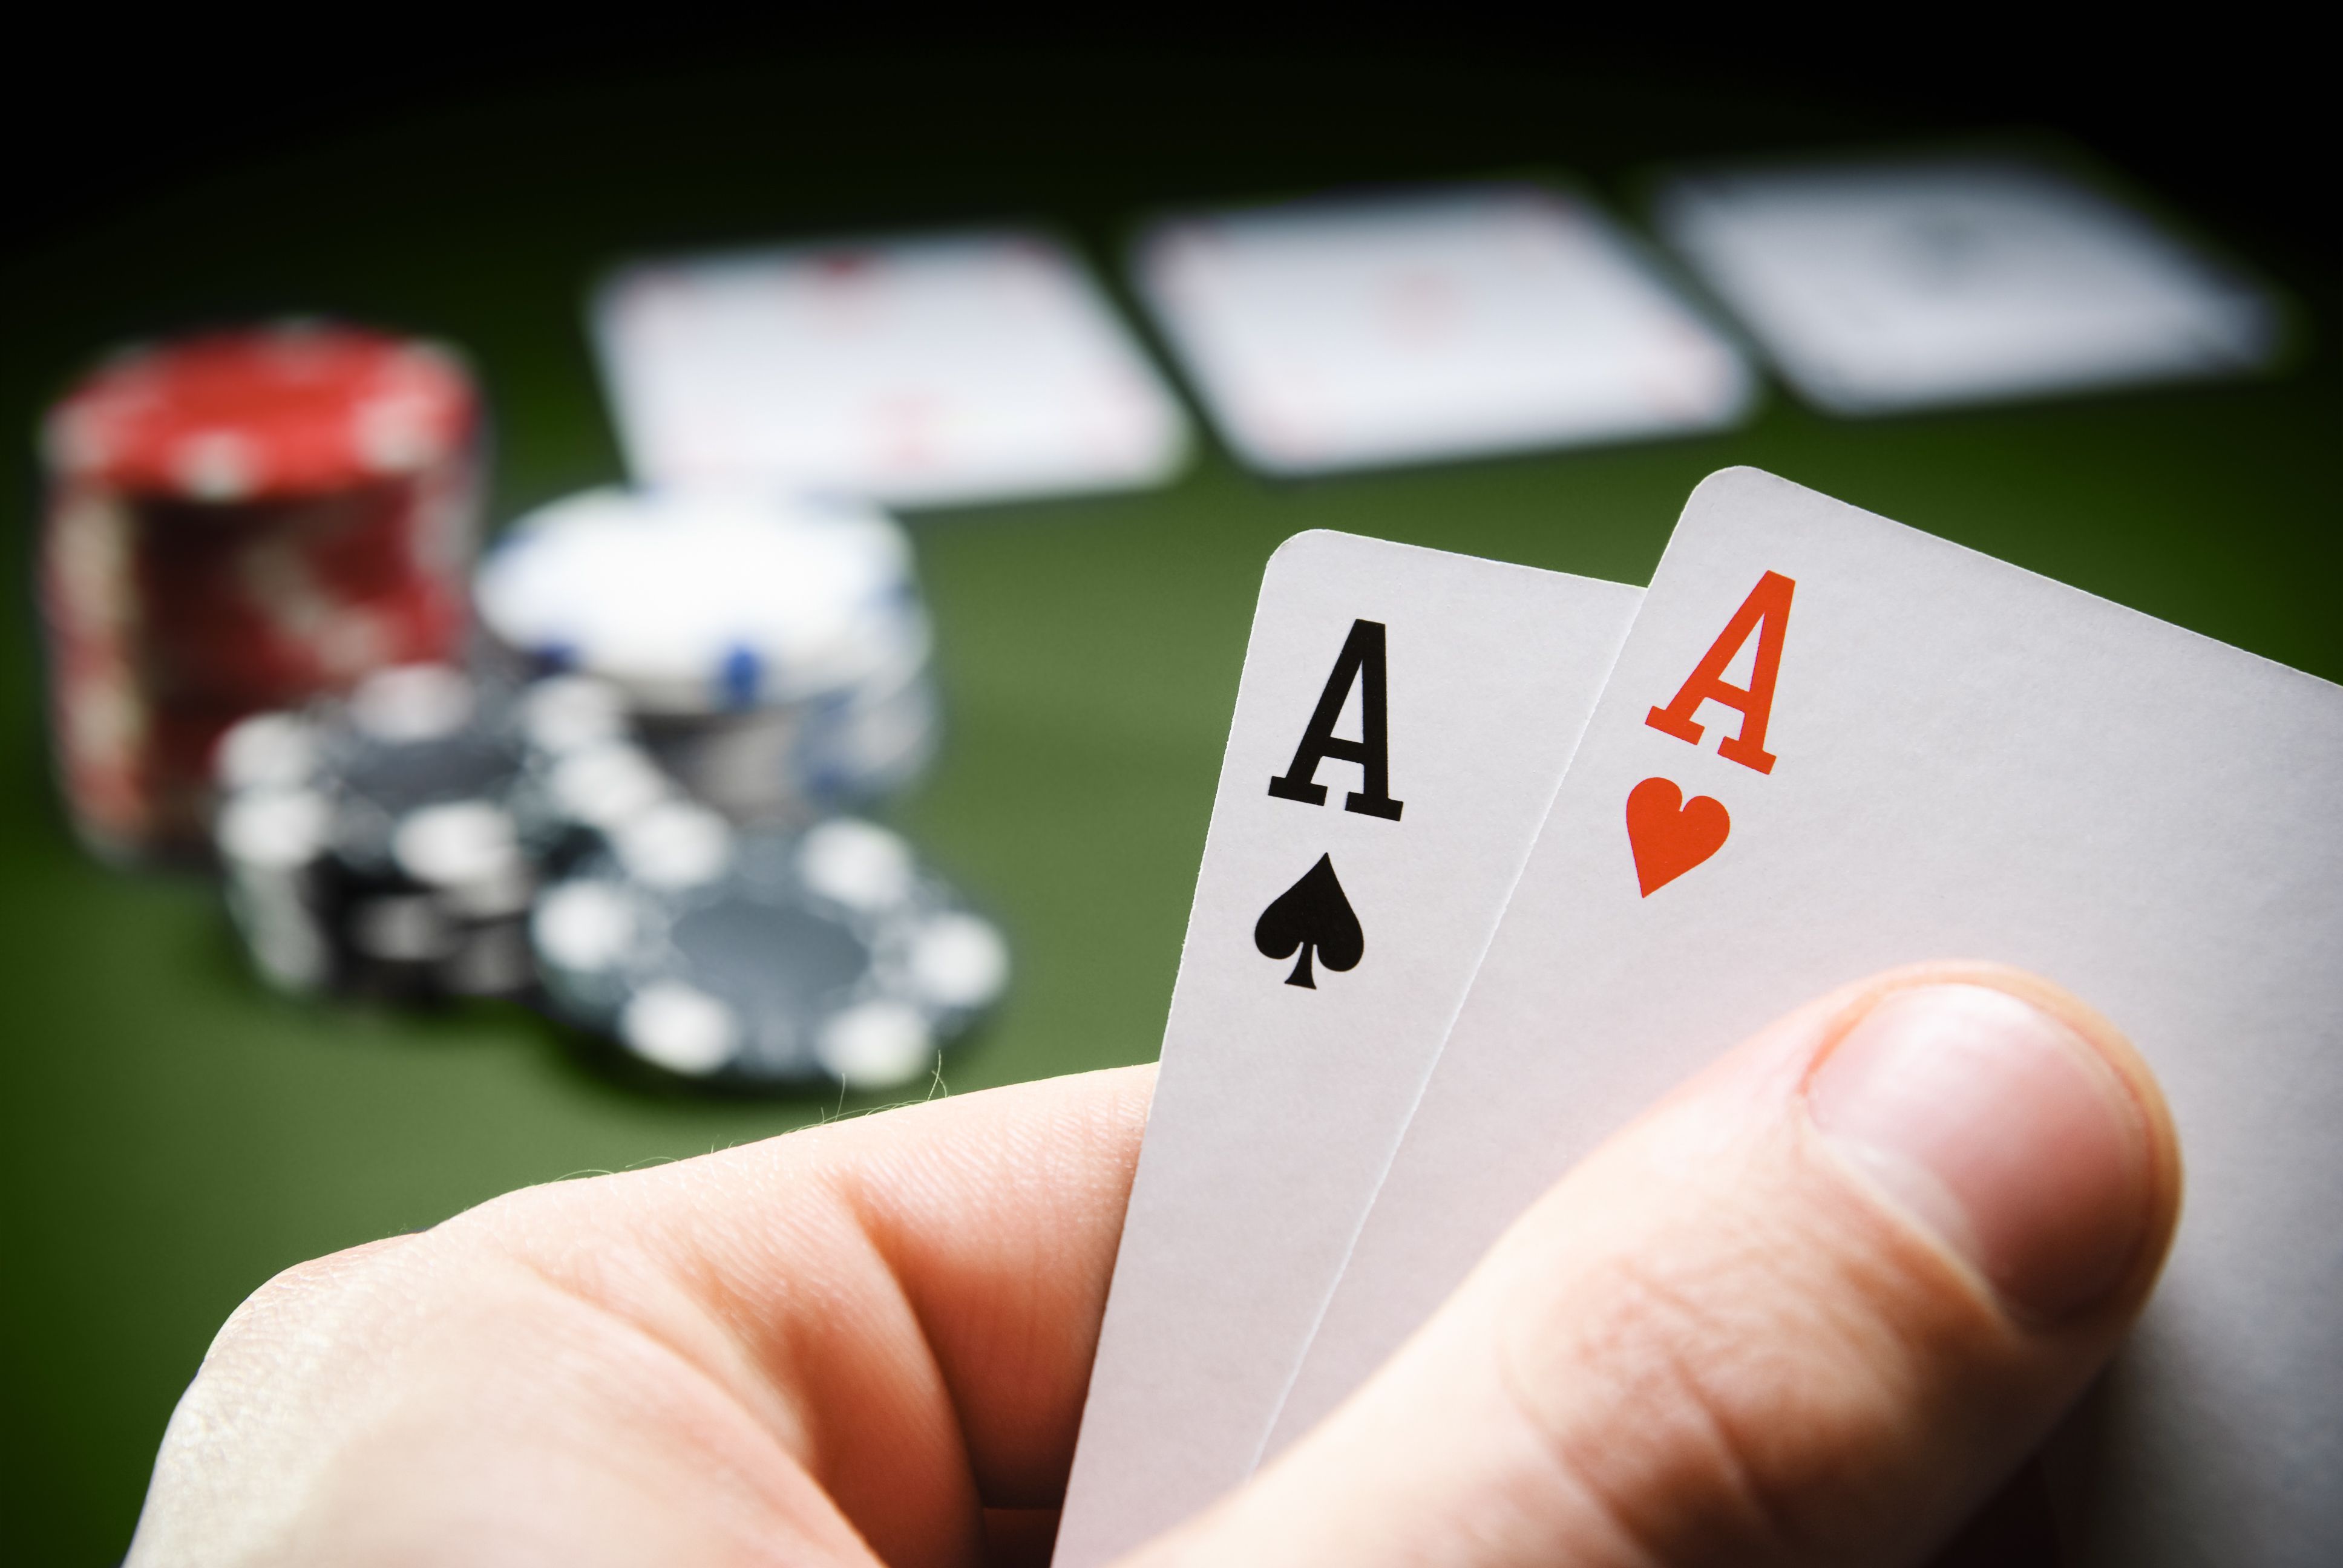 Five Easy Ways to Improve at Texas Hold 'Em Poker